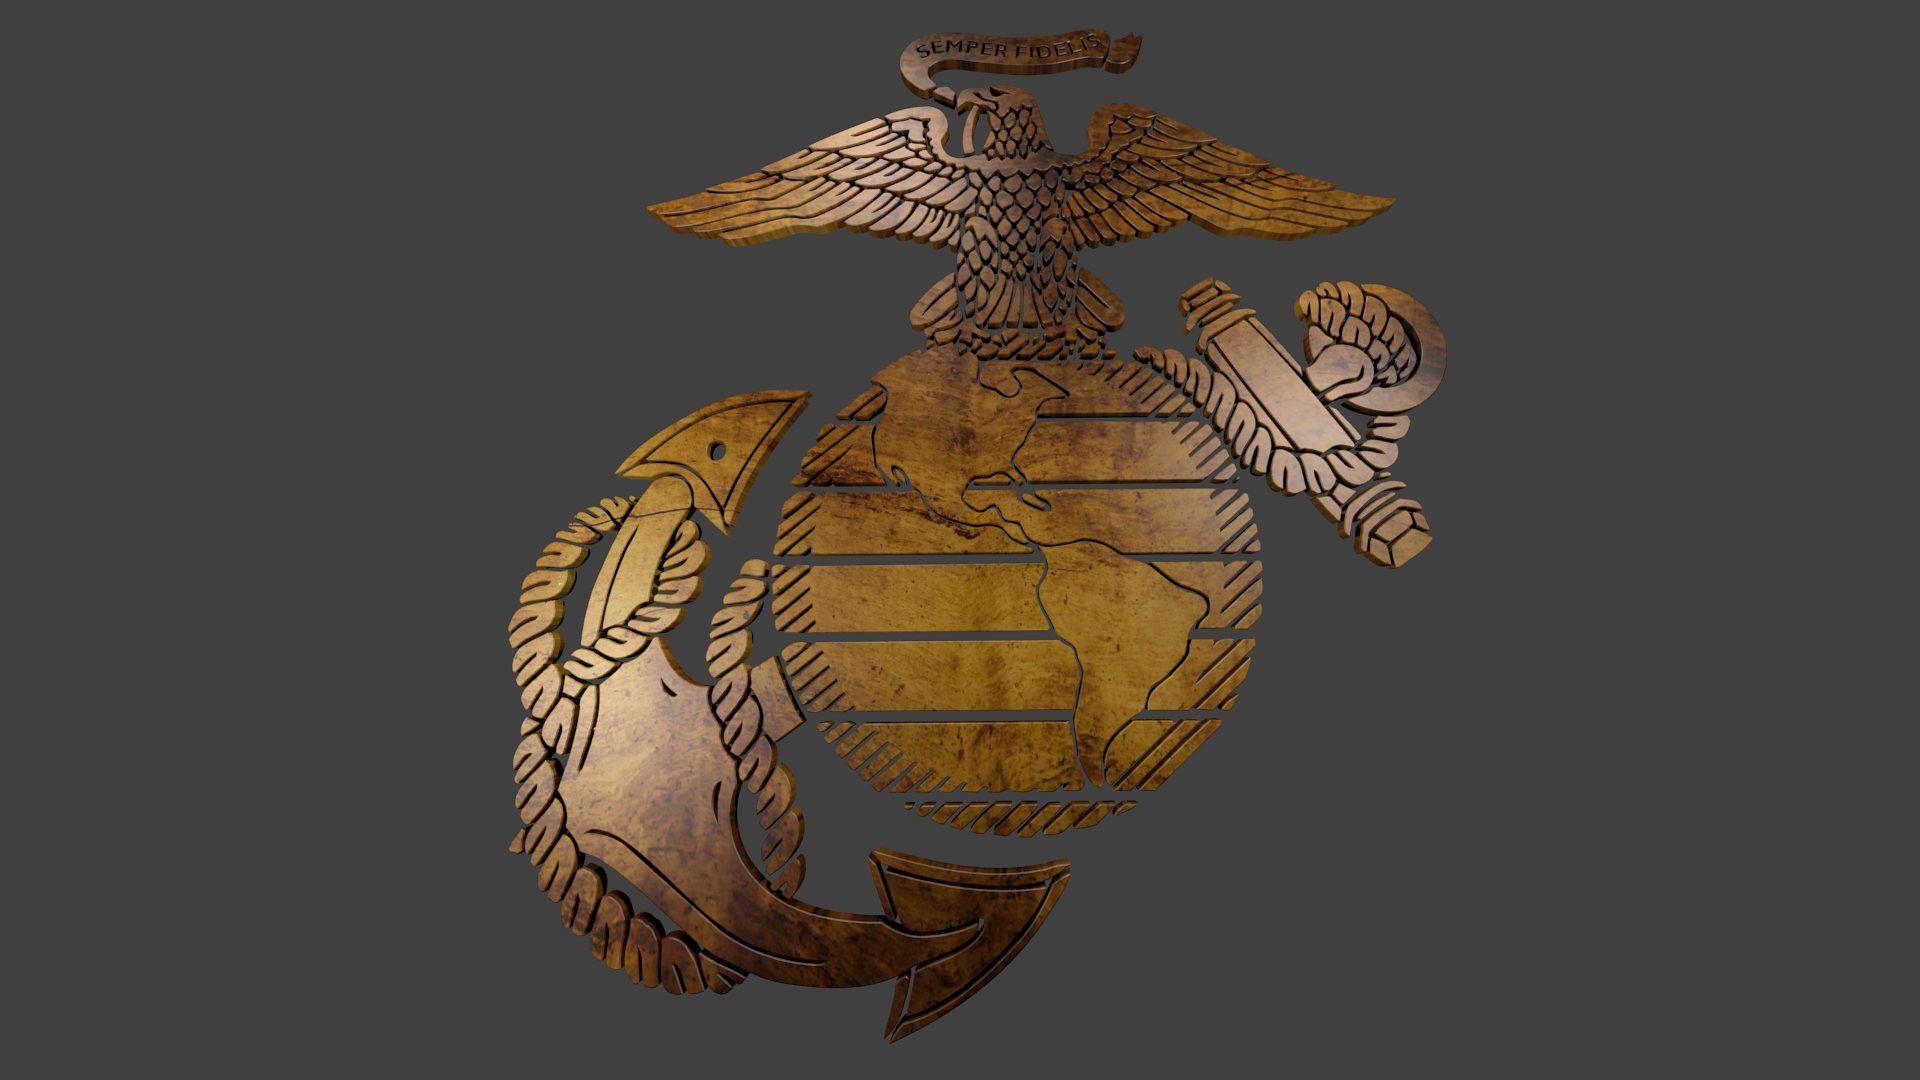 Photo Collection Usmc Wallpapers 1920X1080 Hd